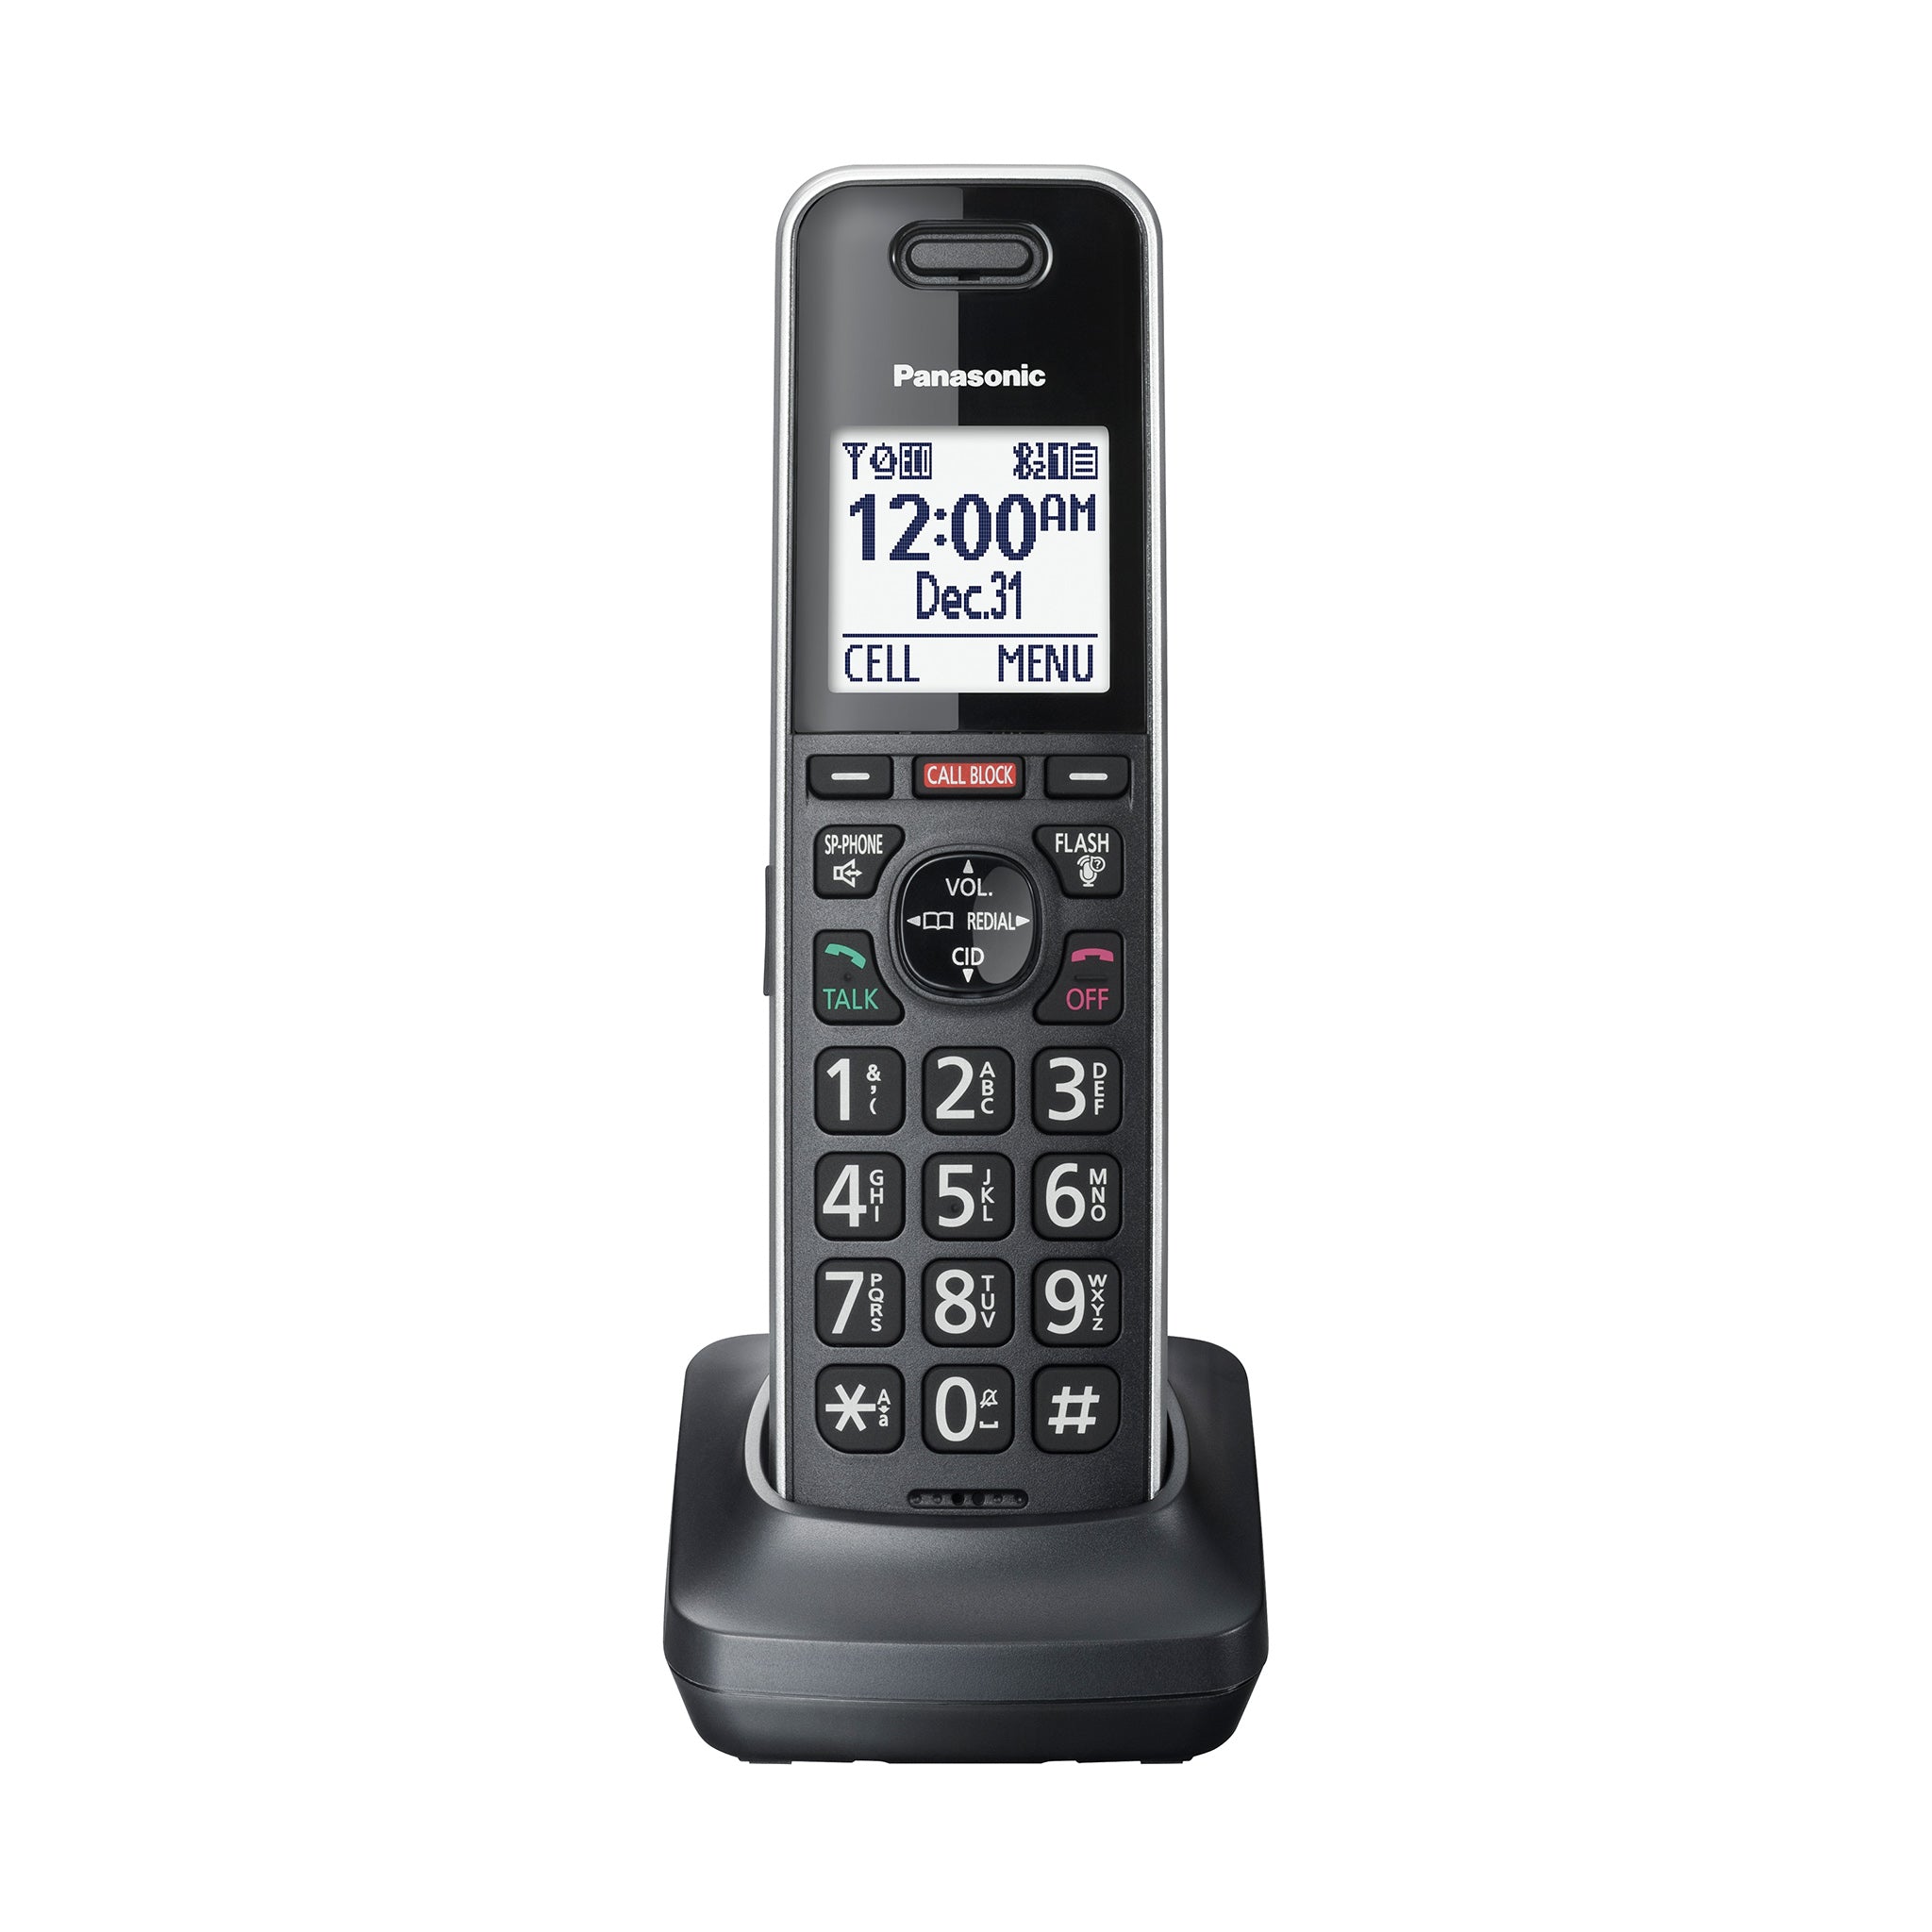 Cordless Phone Accessory Handset for TGF88x Series